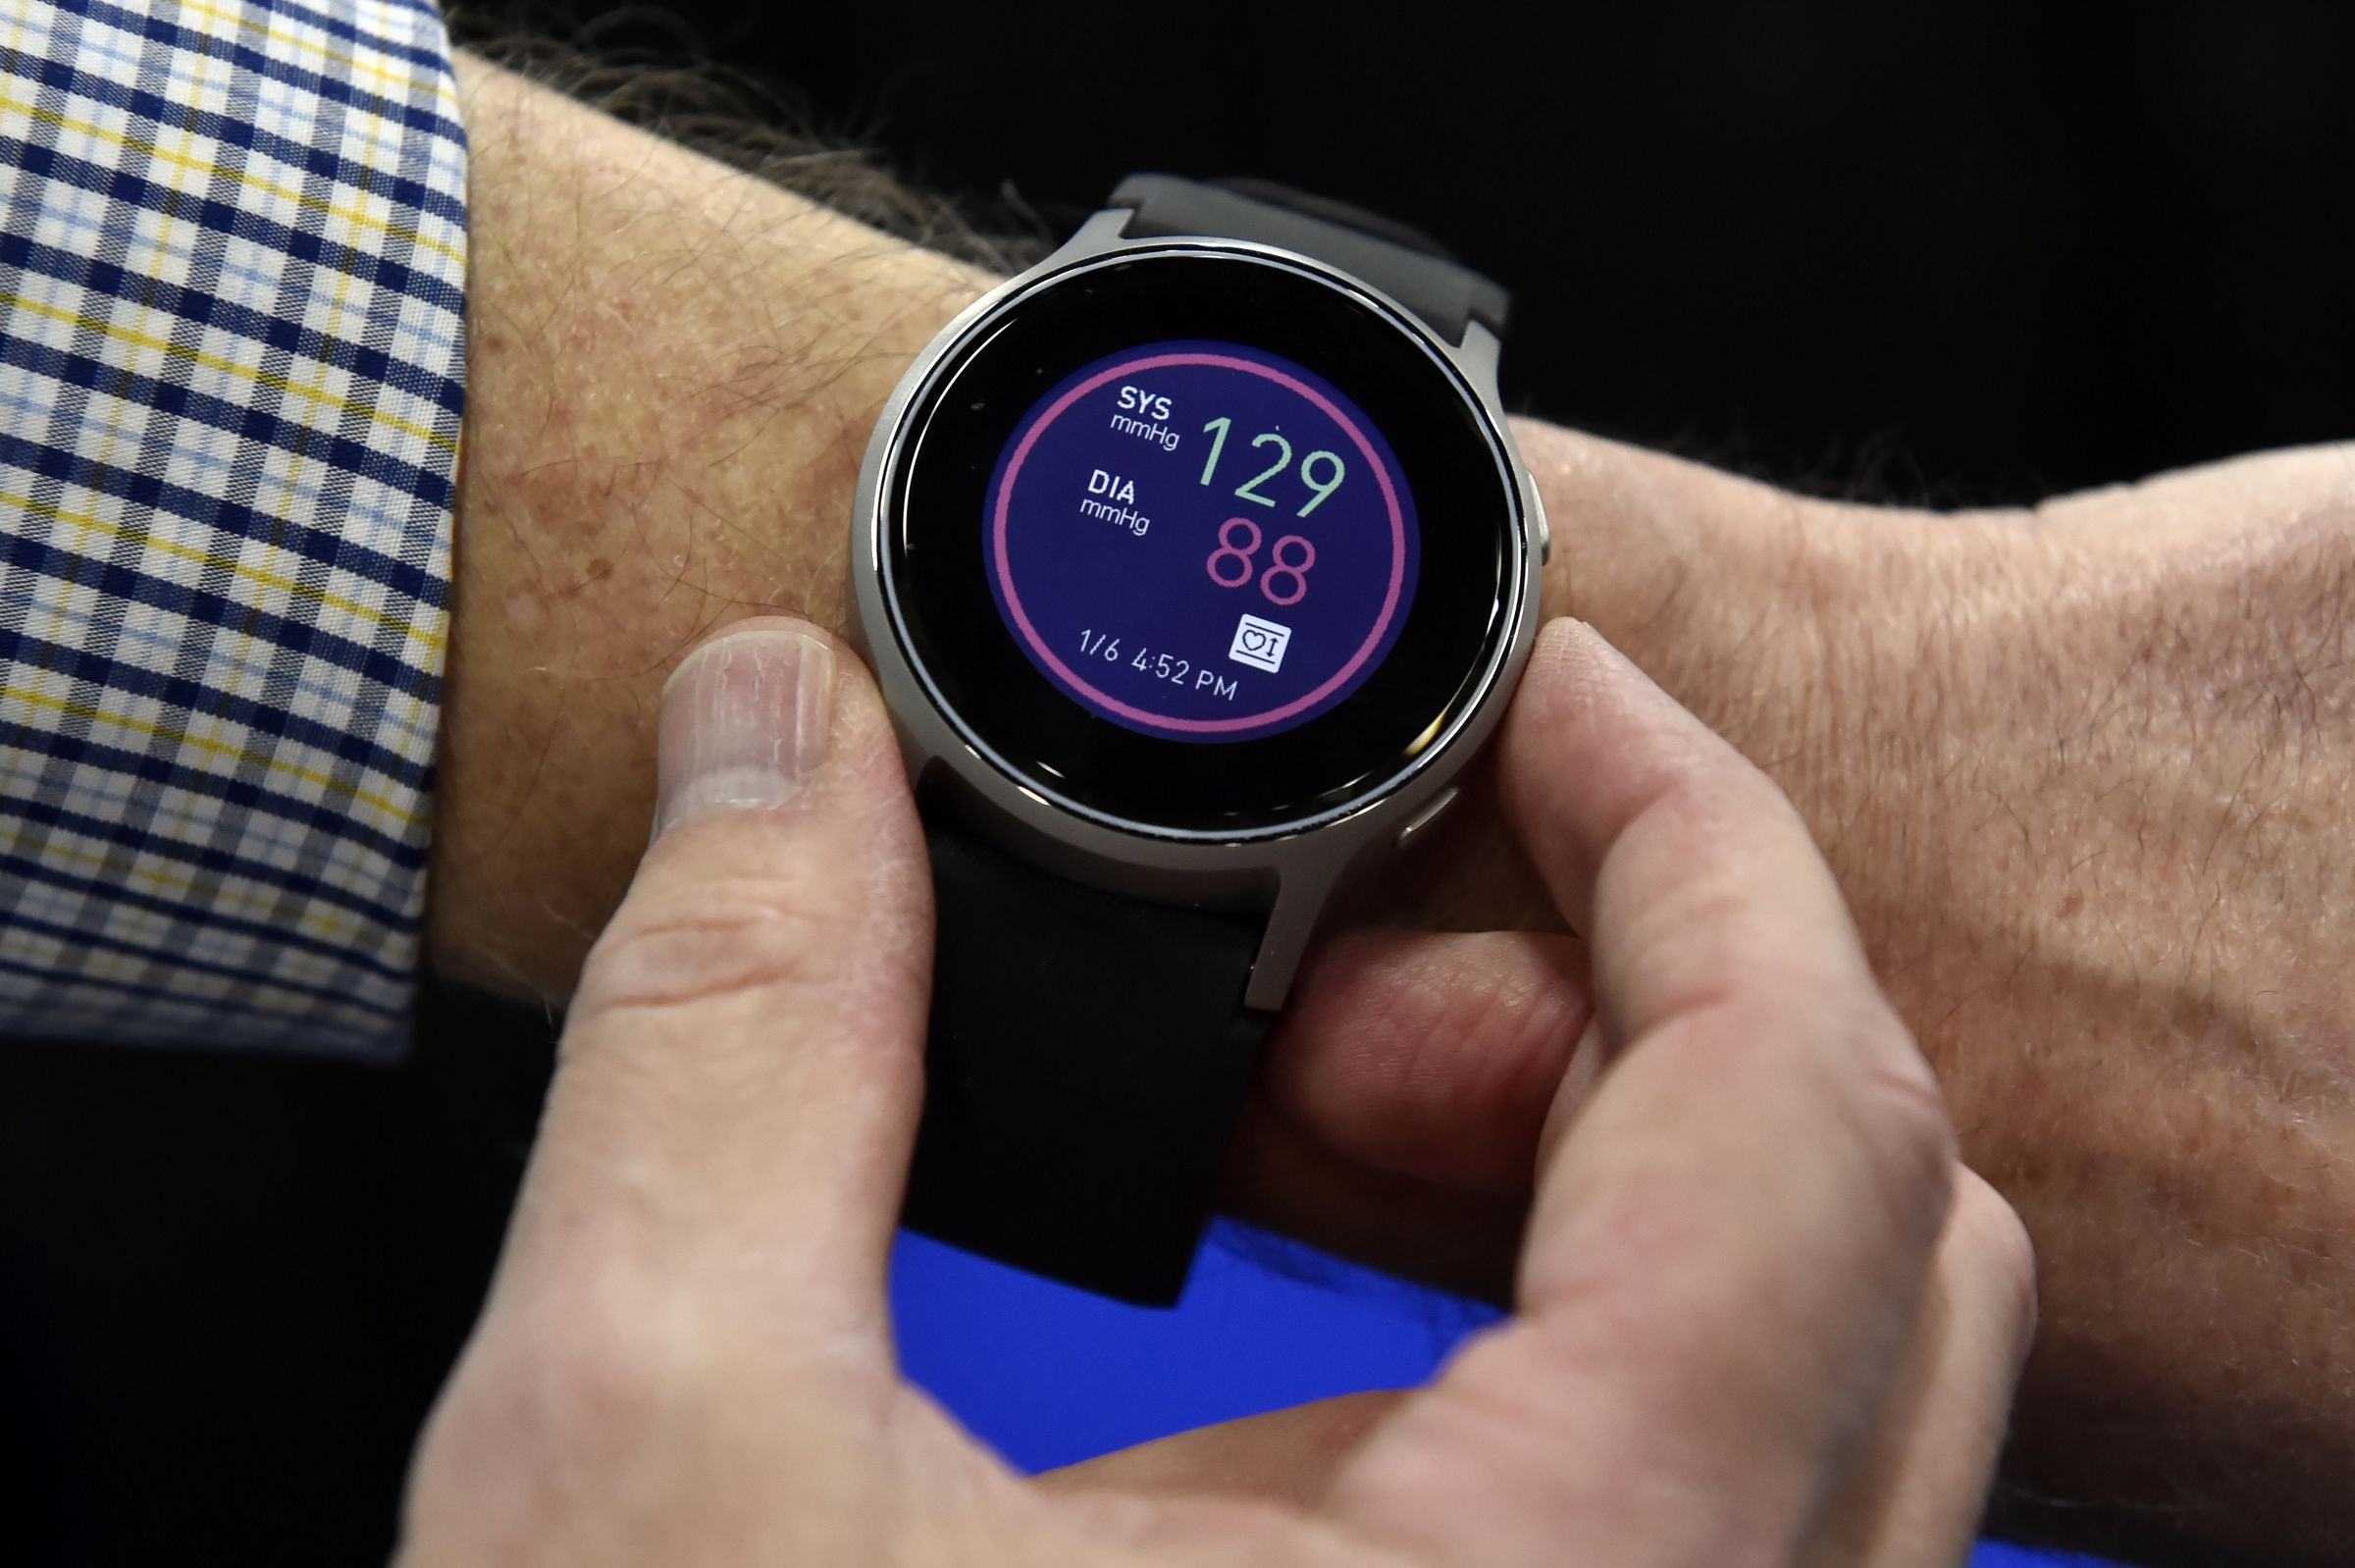 A watch displaying blood pressure reading on a person’s wrist.